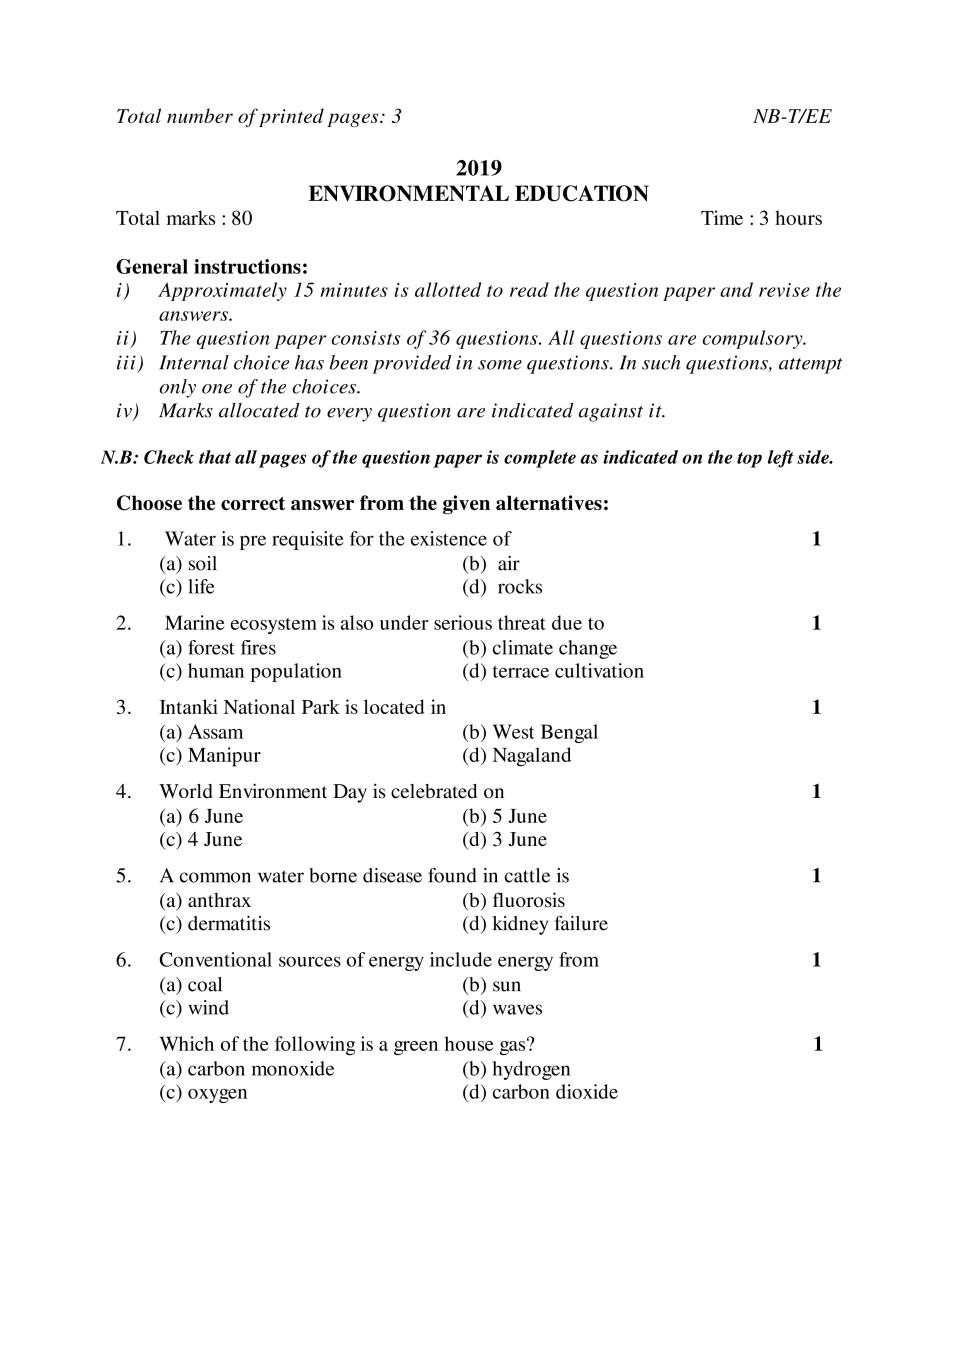 NBSE Class 10 Question Paper 2019 for Env.Education - Page 1